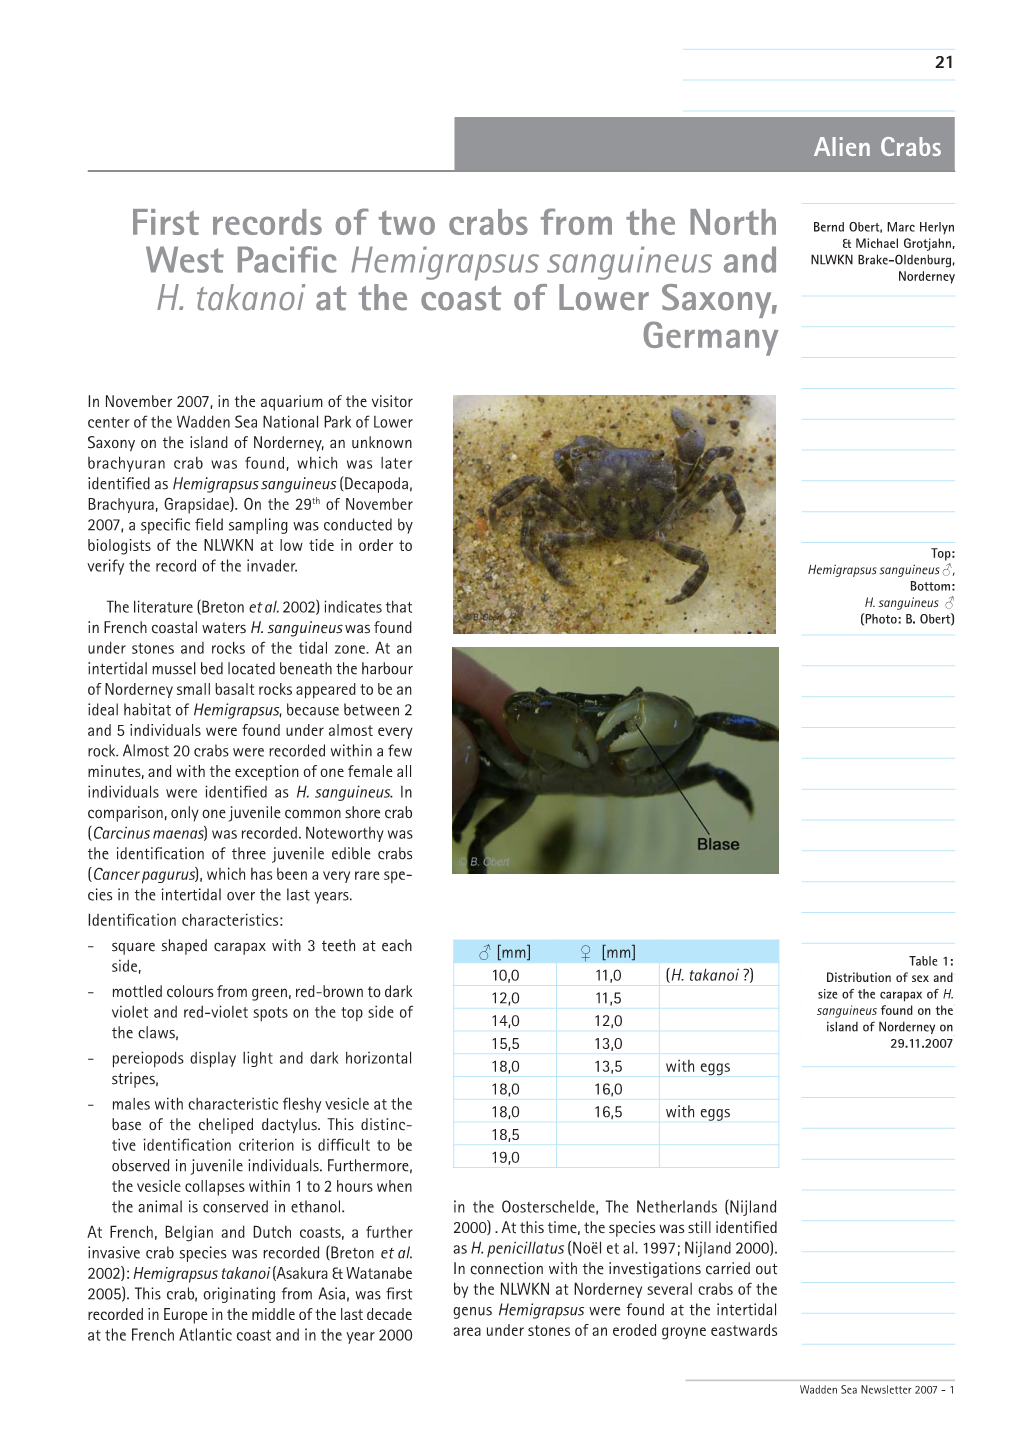 First Records of Two Crabs from the North West Pacific Hemigrapsus